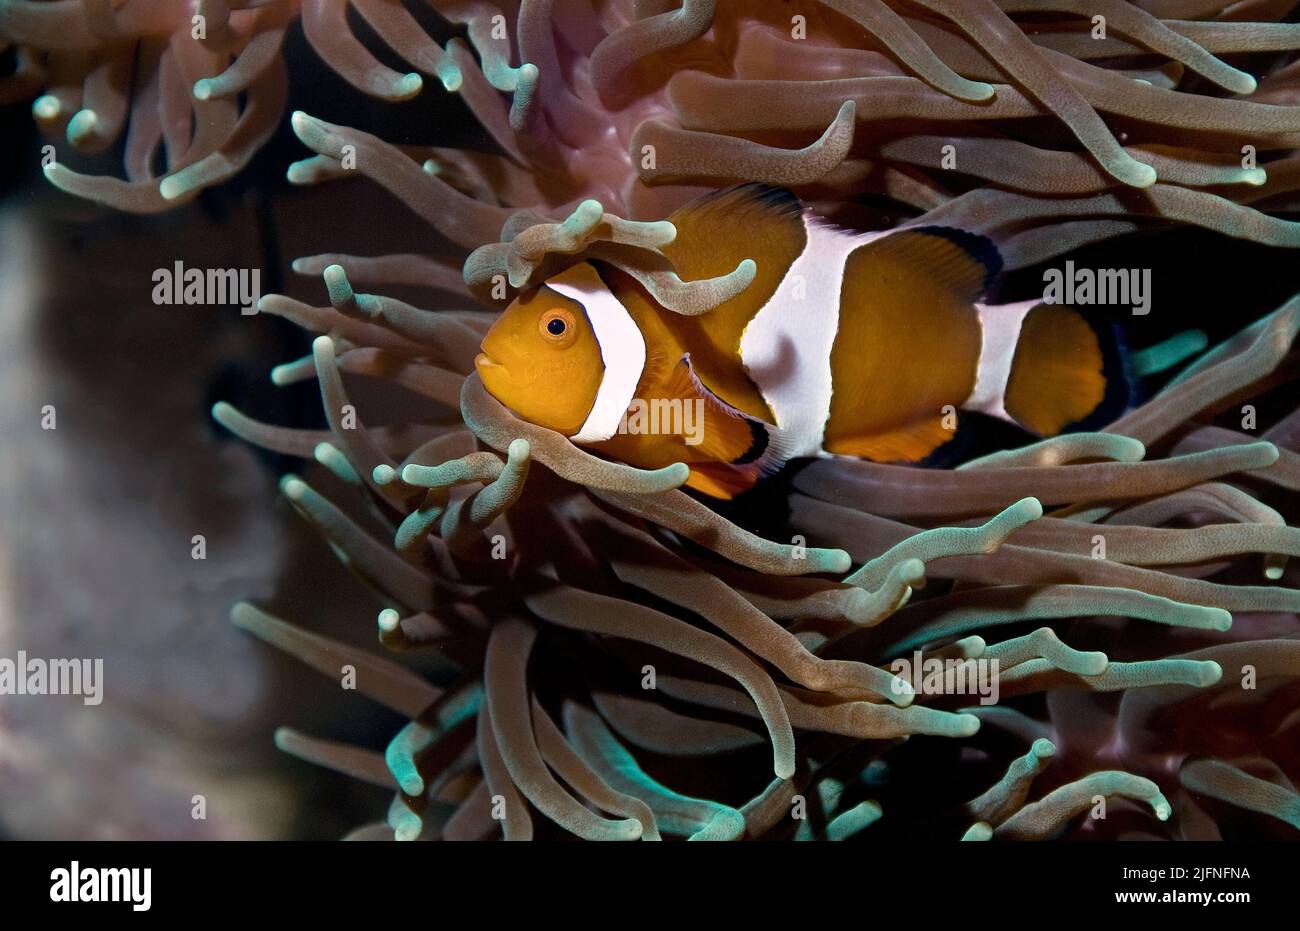 'Nemo' or Clownfish (Amphiprion ocellaris) among the tentacles of a host-sea anemone (Heteractis crispa). Stock Photo